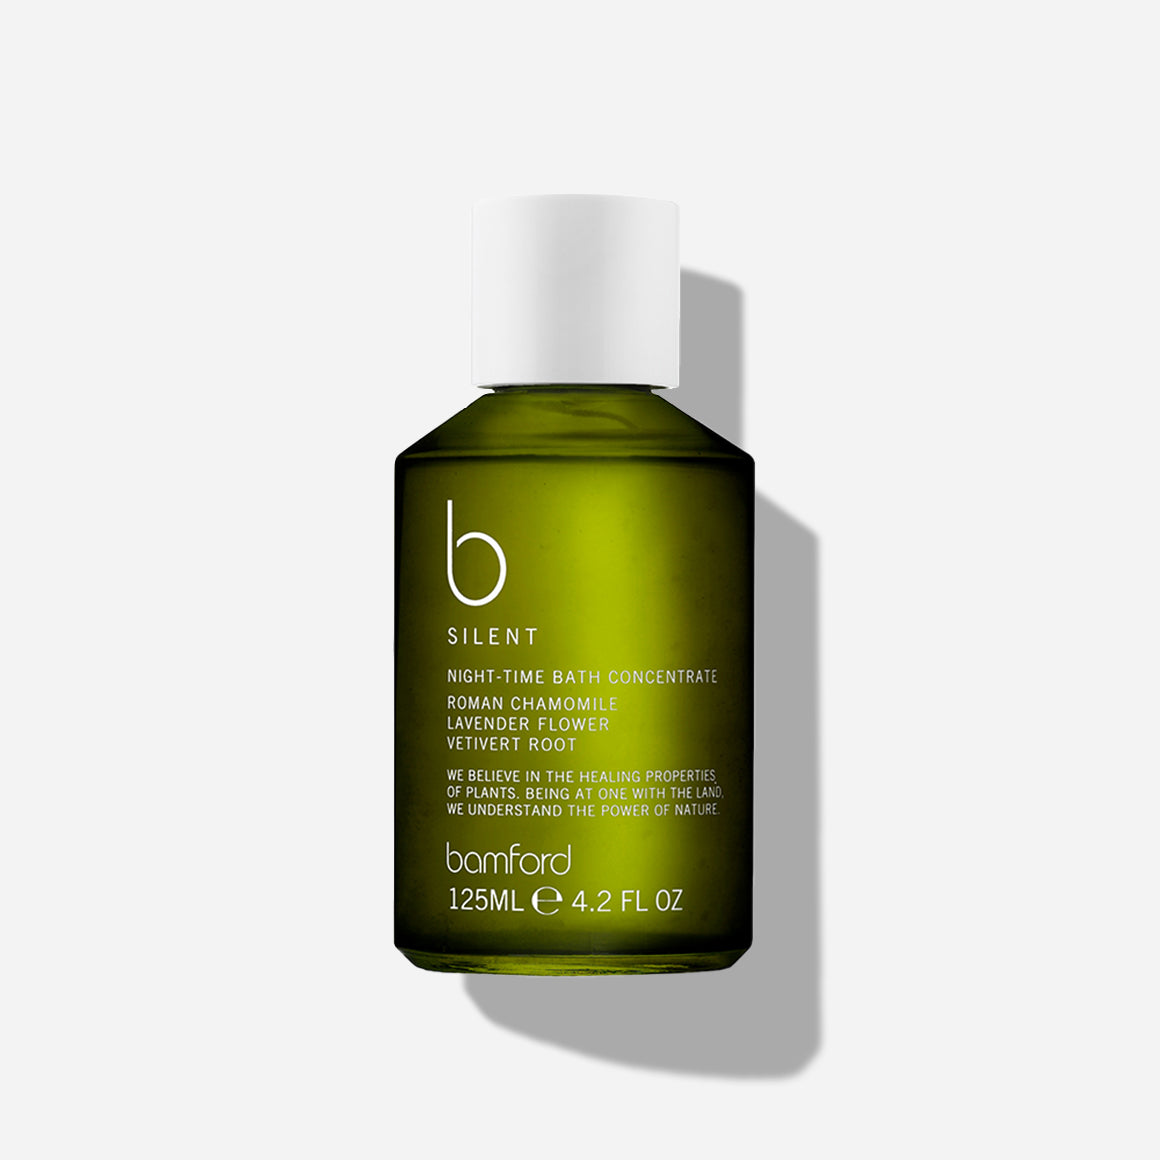 B Silent Night-Time Bath Concentrate